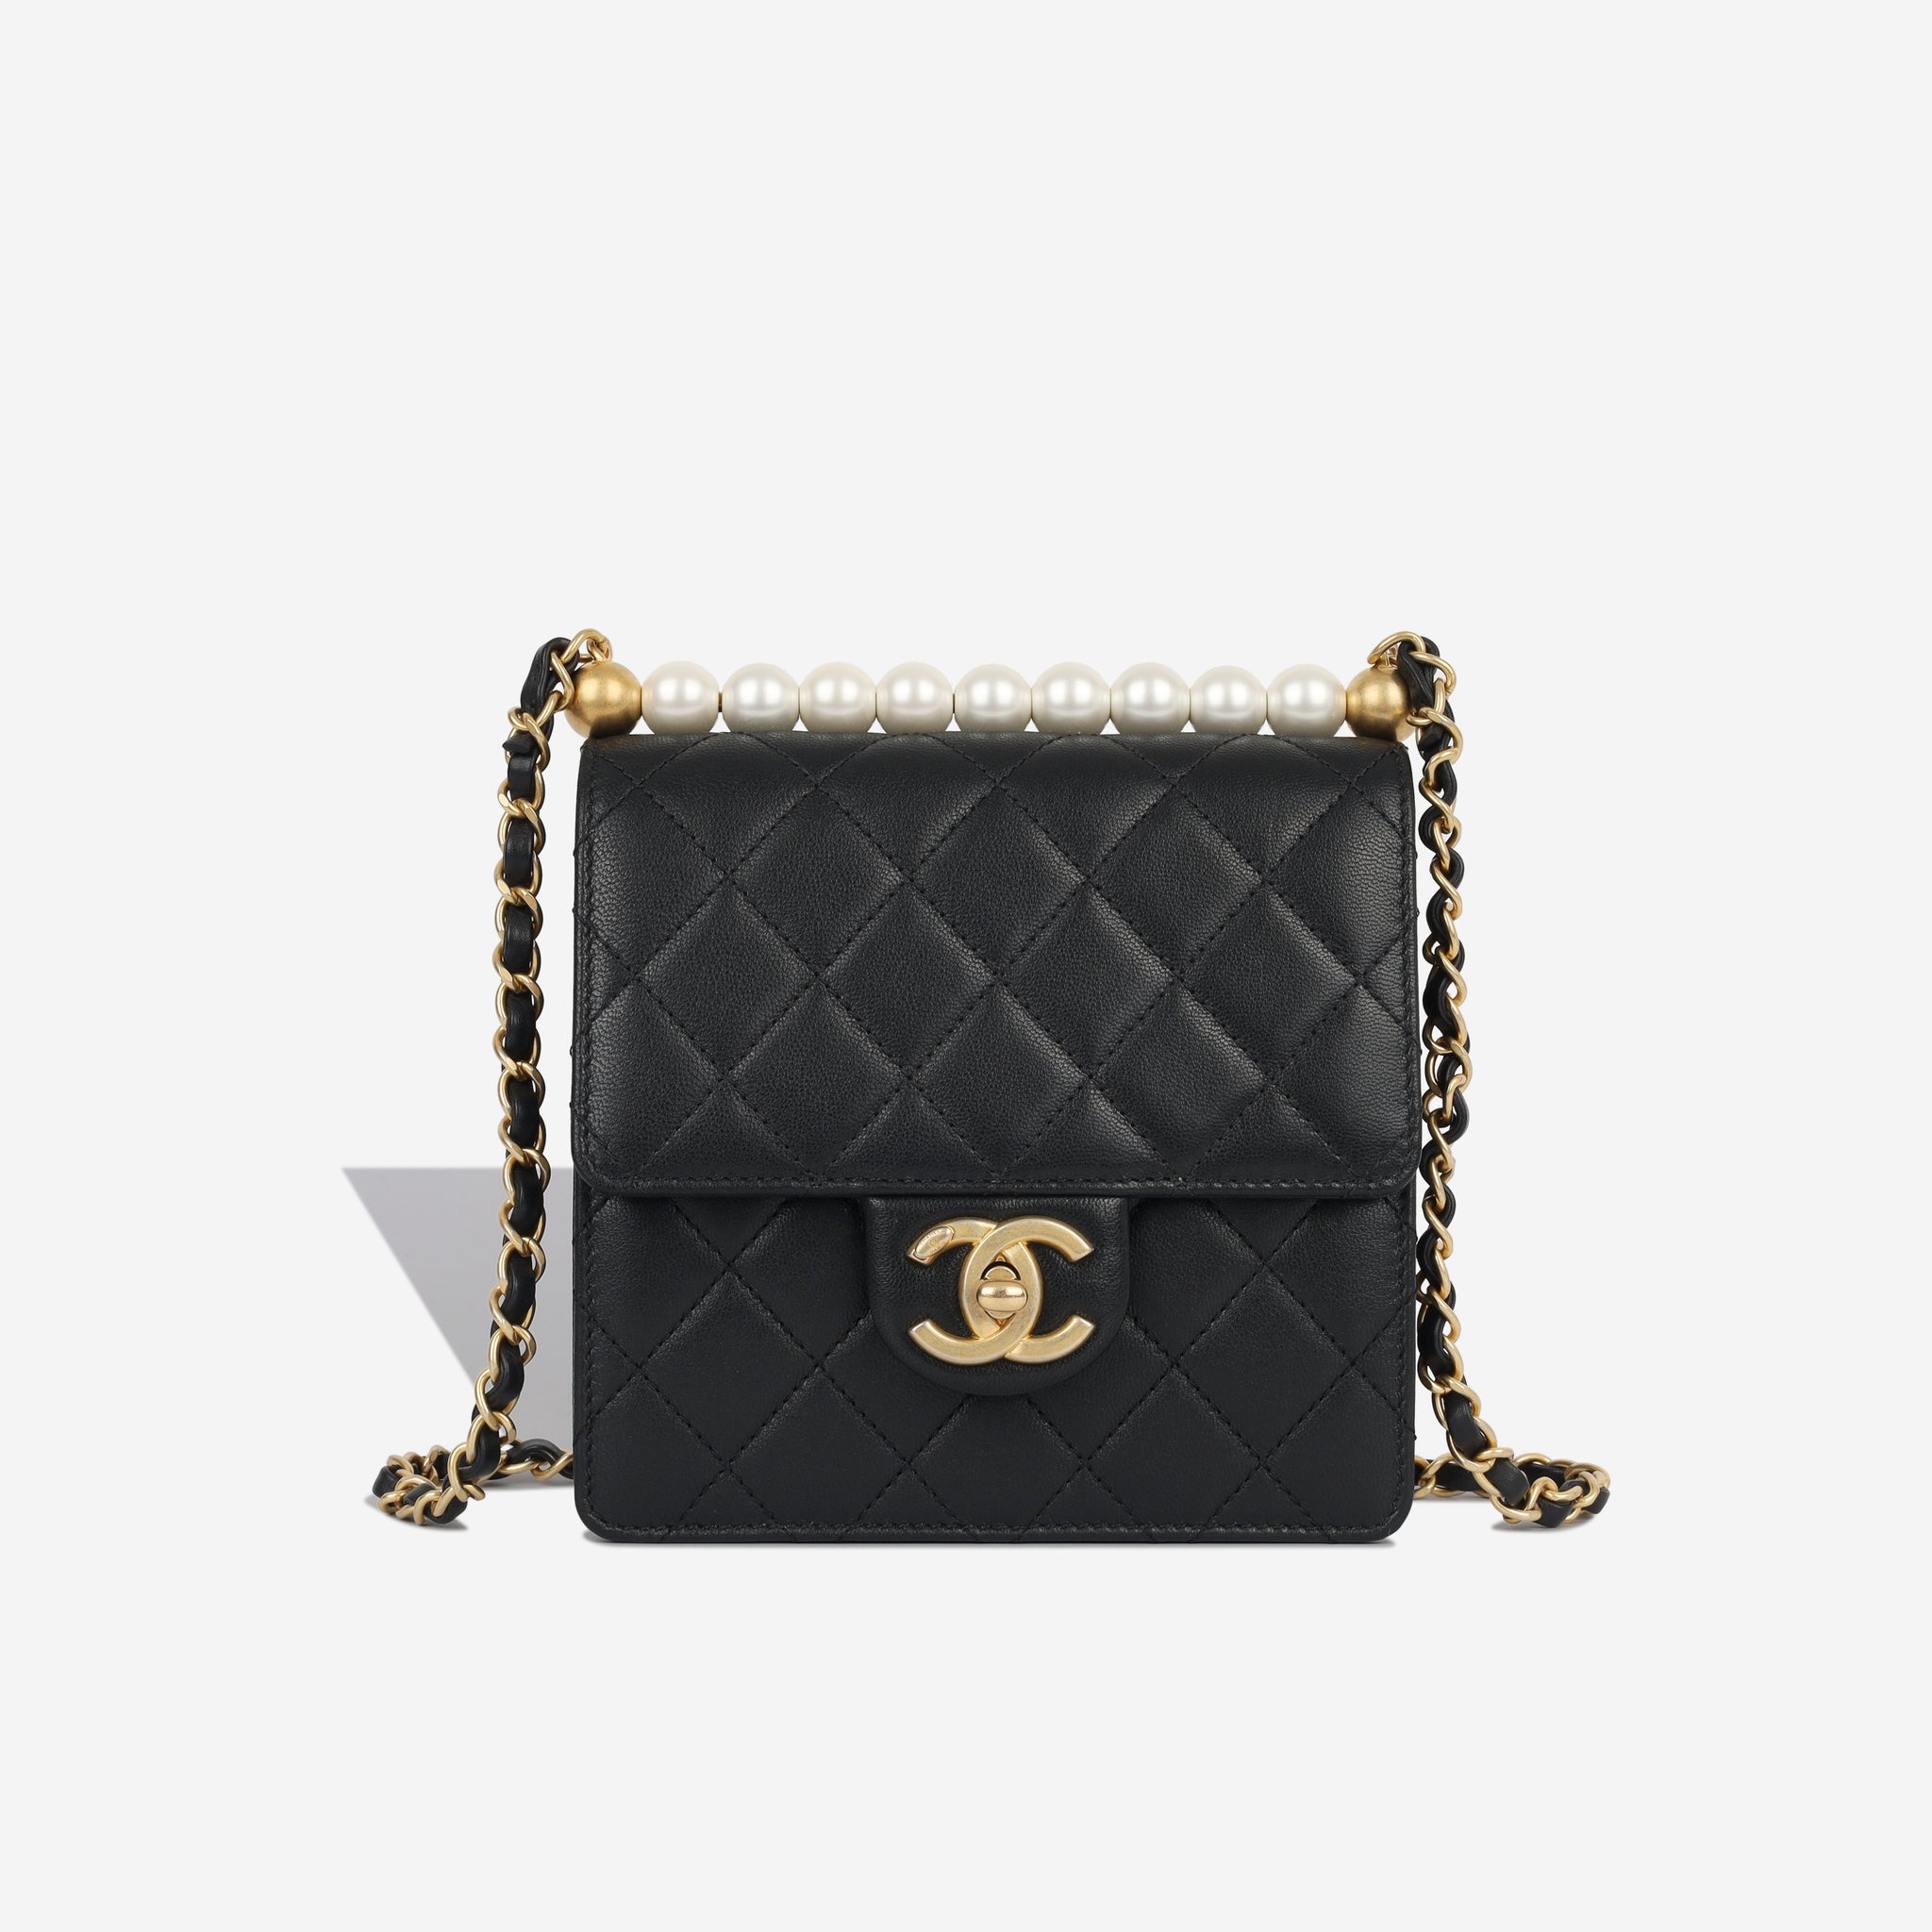 We want Alexas new Chanel bag